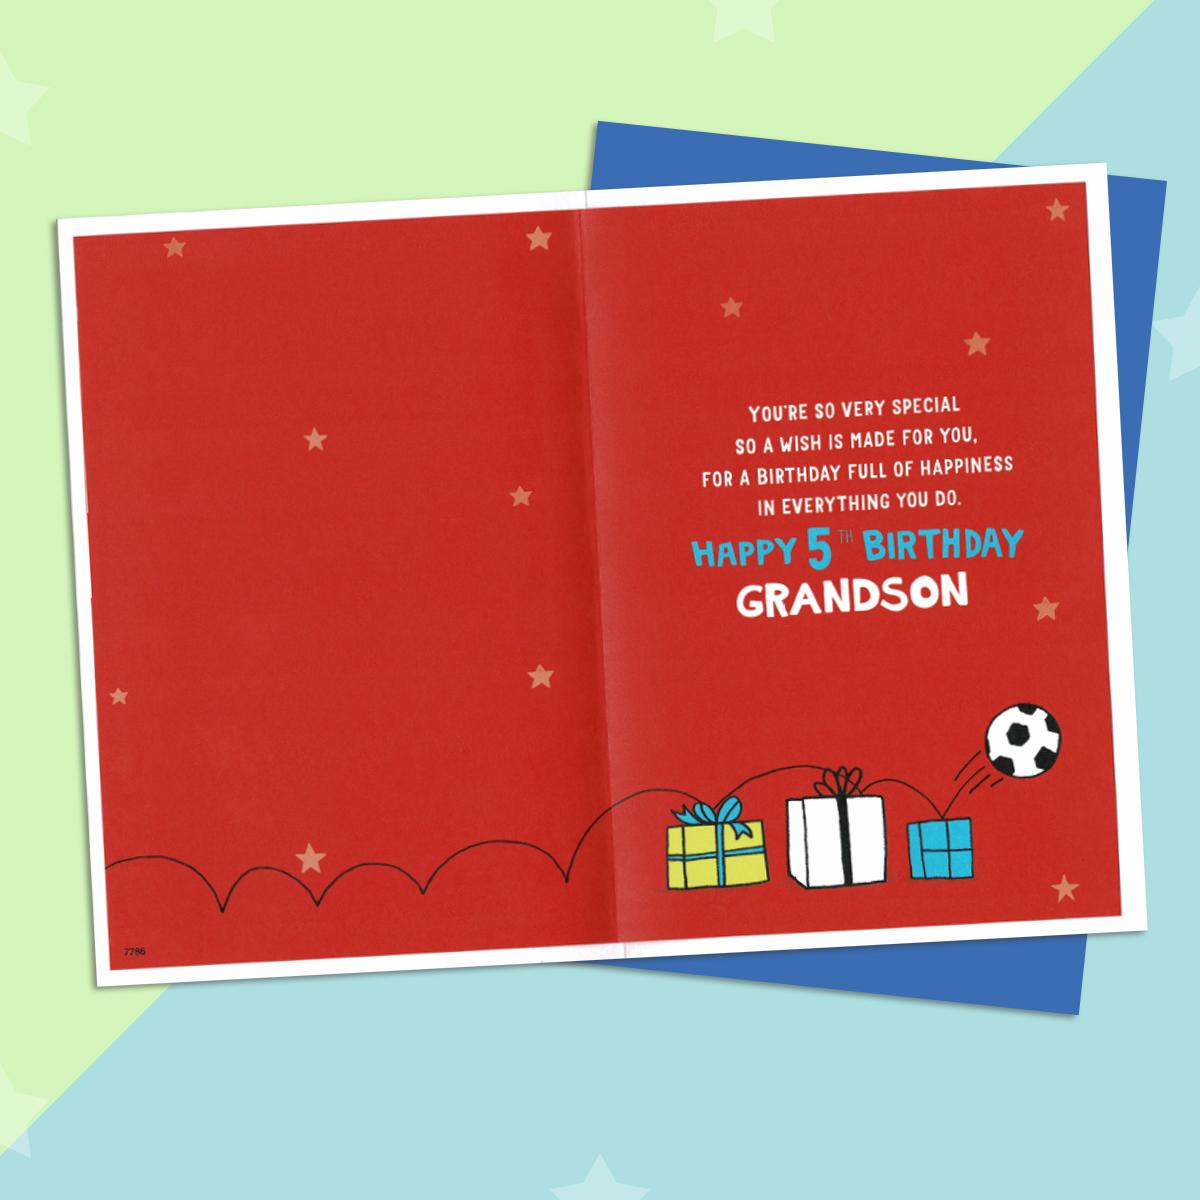 Inside Image Of Age 5 Grandson Card Showing Layout And Printed Text